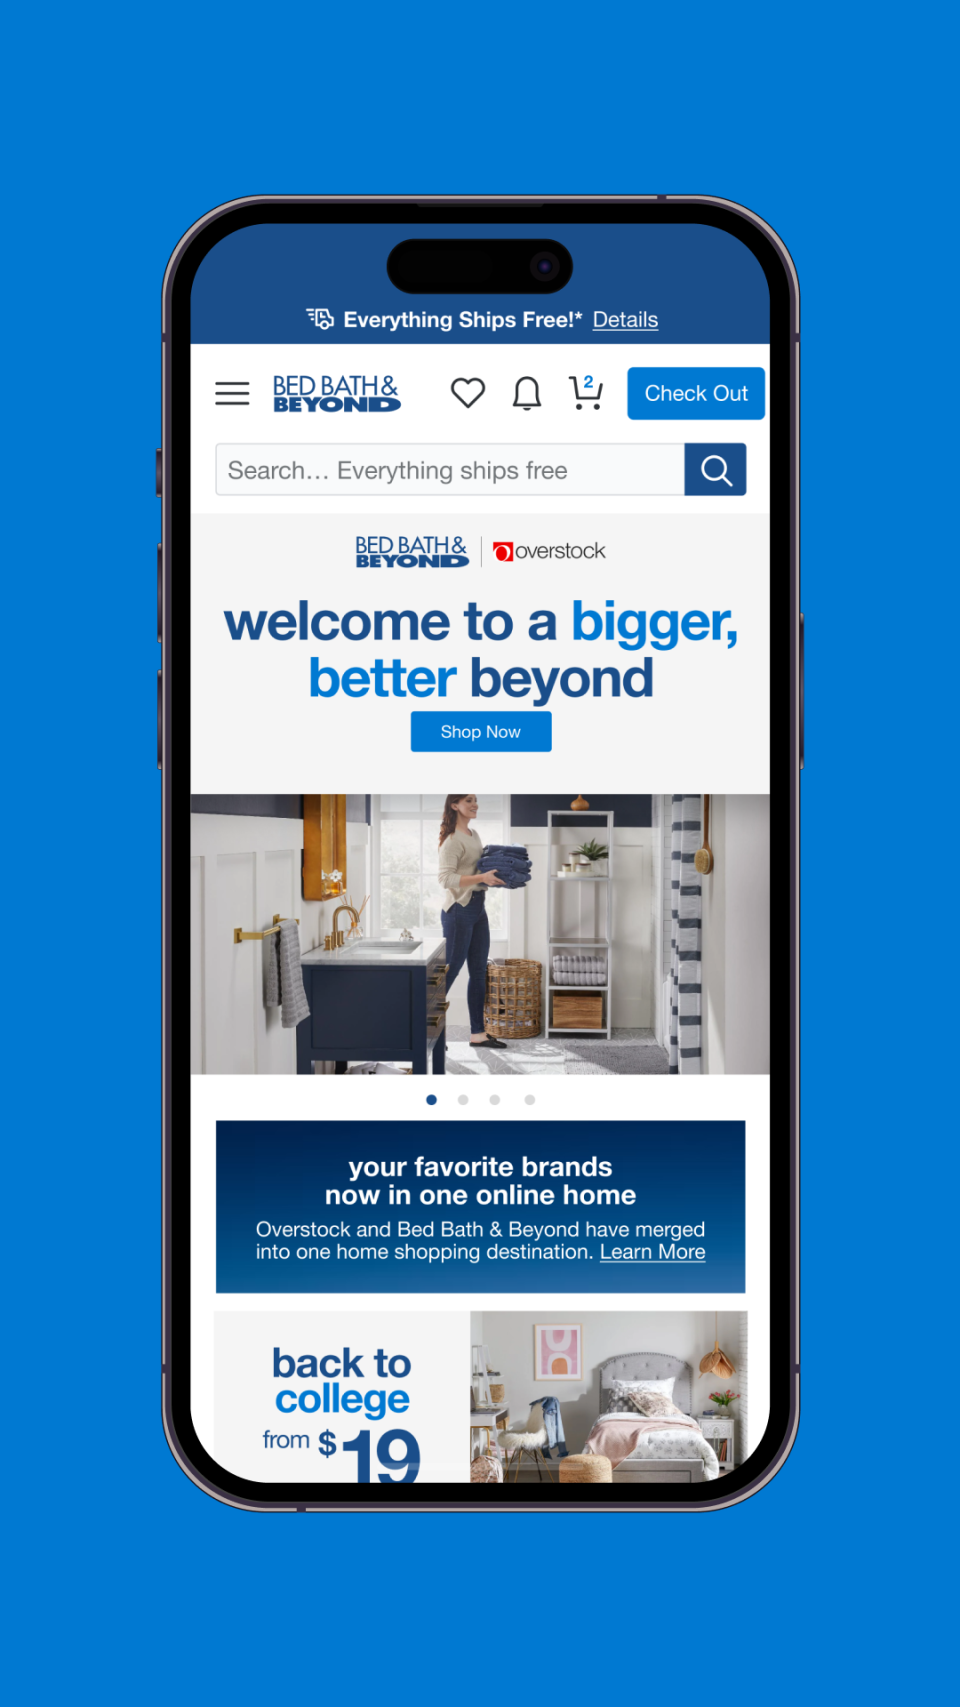 The new Bed, Bath & Beyond website and app promotes a "bigger, better beyond."